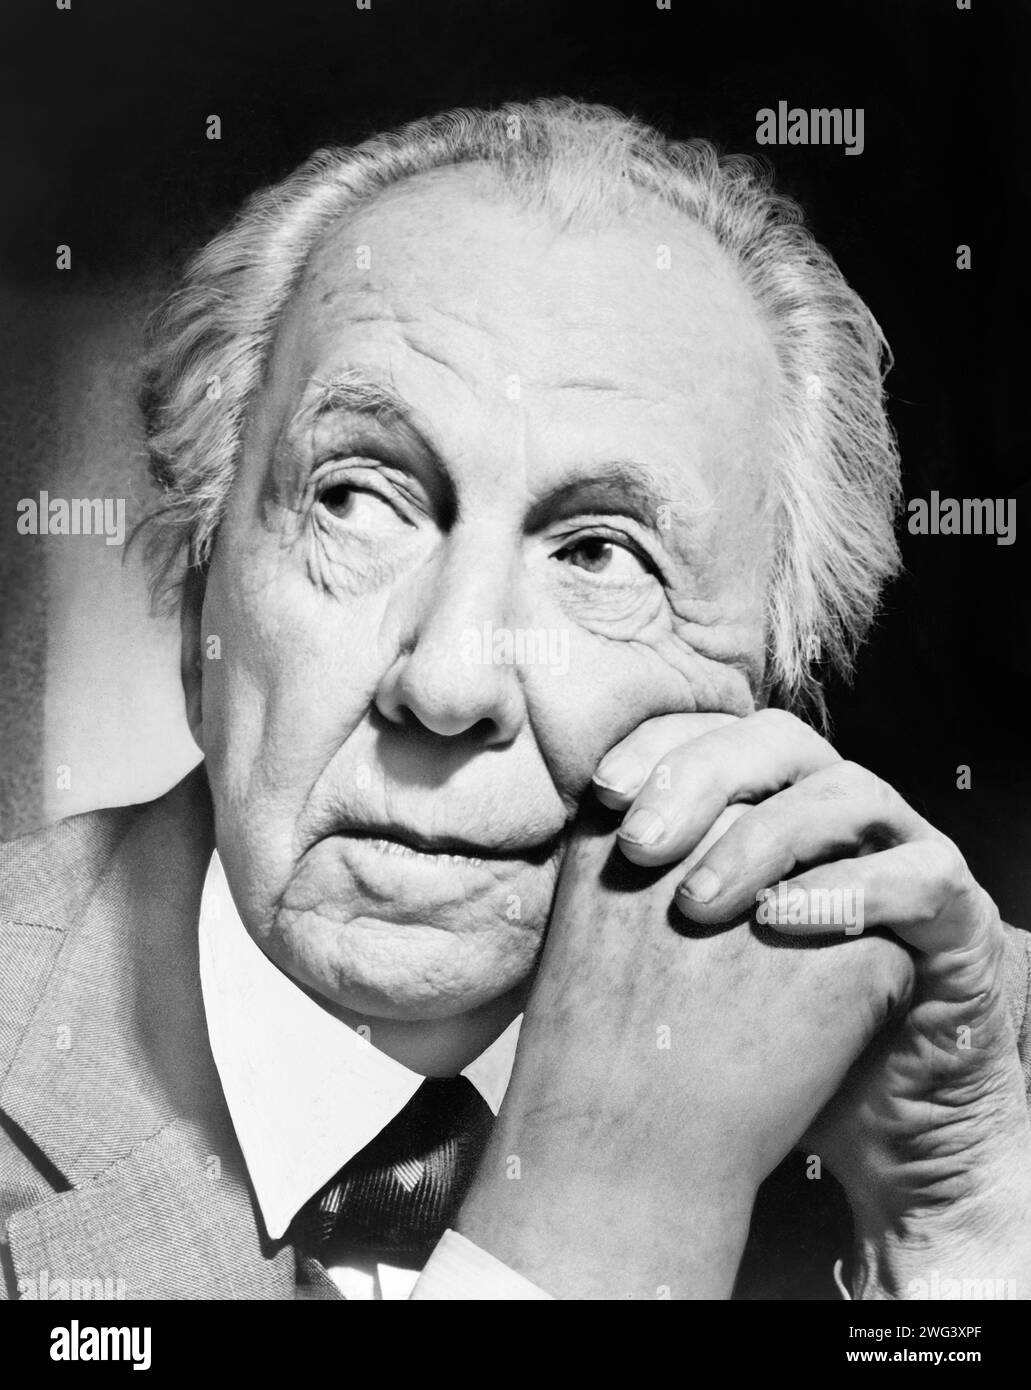 Frank Lloyd Wright (1867-1959), American architect pioneer of the Prairie School movement, in a portrait from 1954. Wright would later be recognized (in 1991) by the American Institute of Architects as 'the greatest American architect of all time.' Stock Photo